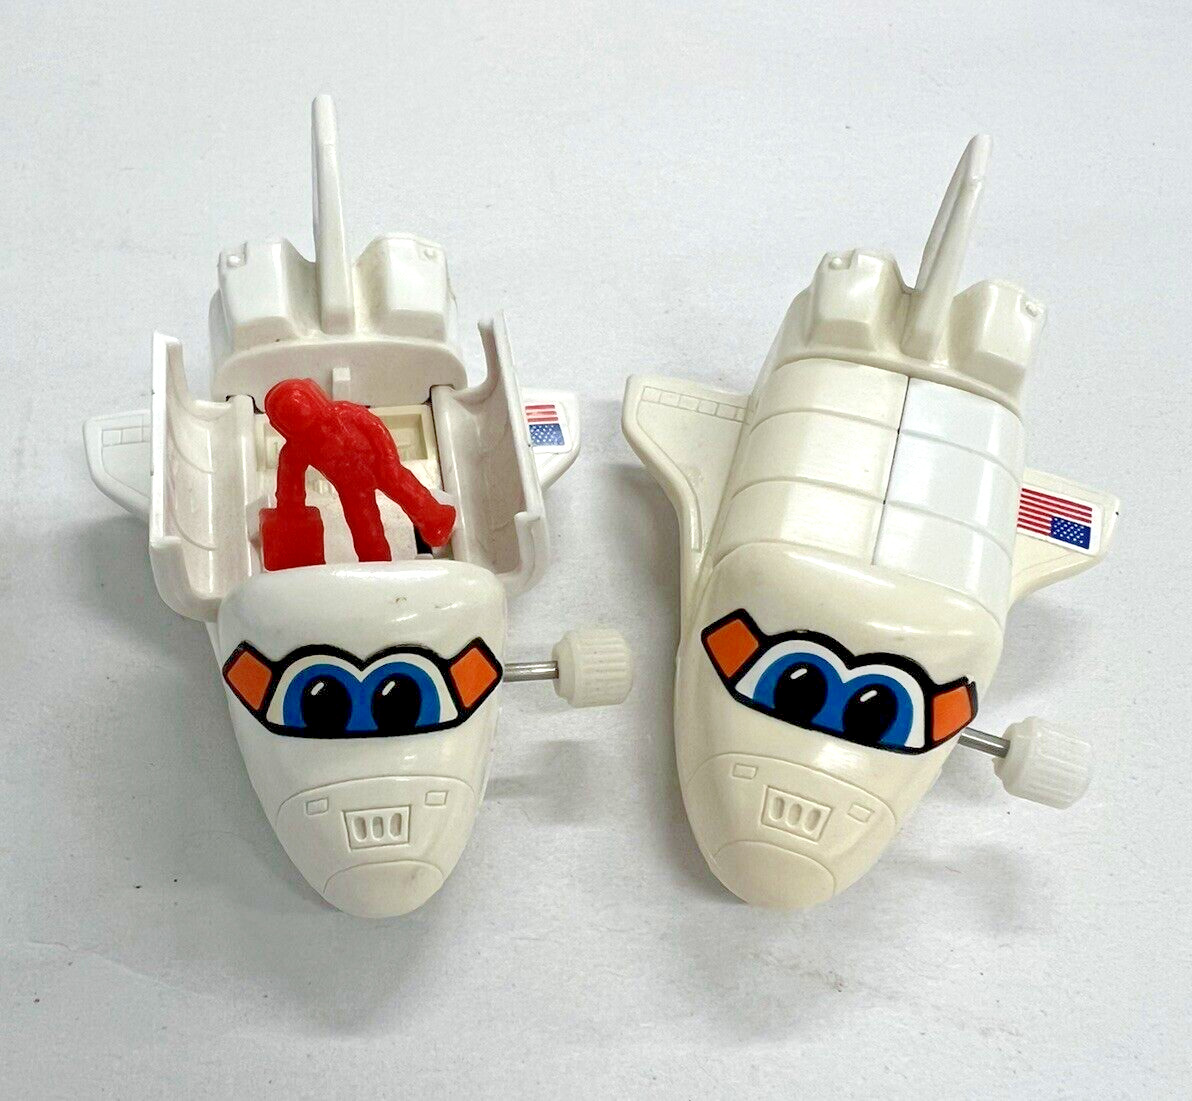 2 TOMY Wind Up Toy Space Shuttles with Orange Astronaut Doors Open/Close Works